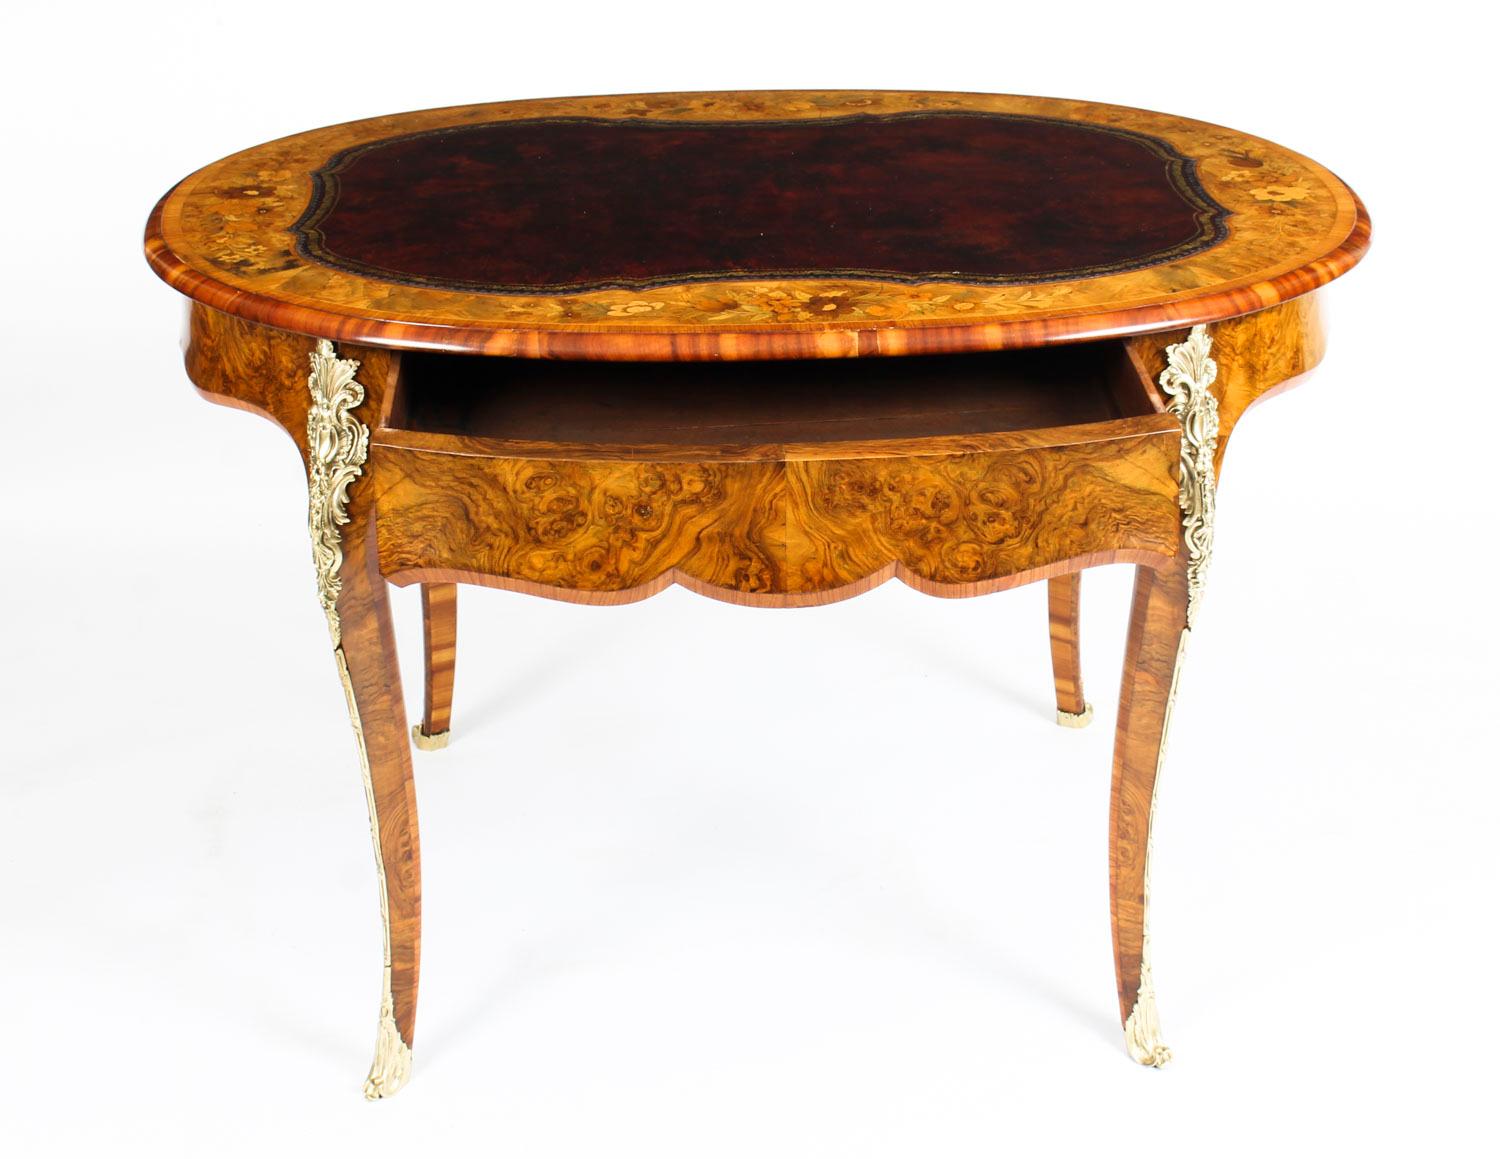 Antique Victorian Burr Walnut & Floral Marquetry Writing Table Desk 19th Century 2